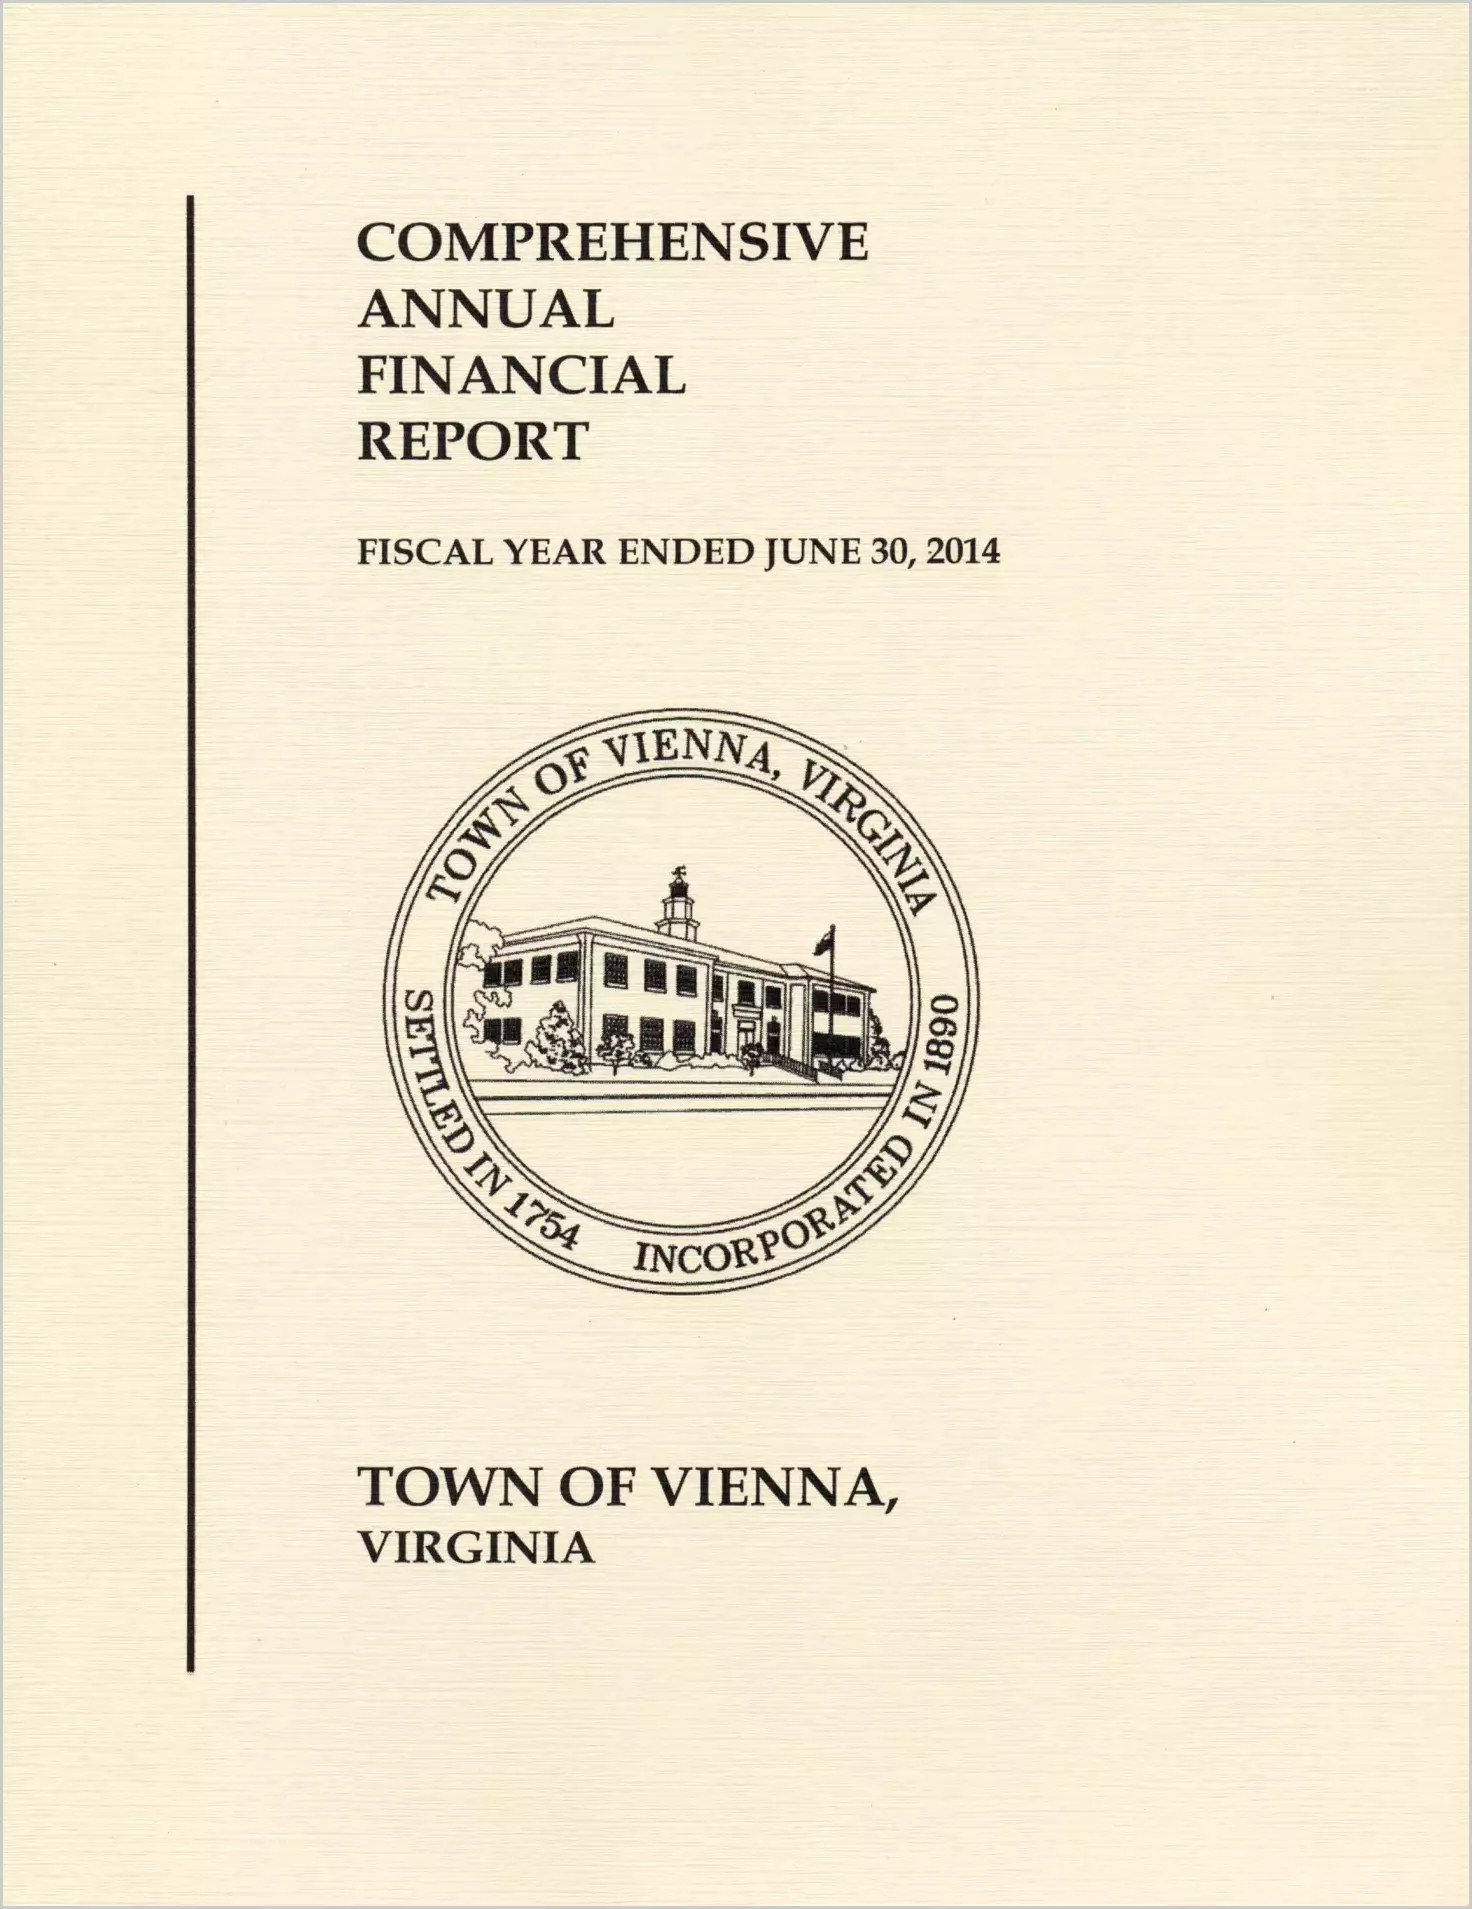 2014 Annual Financial Report for Town of Vienna